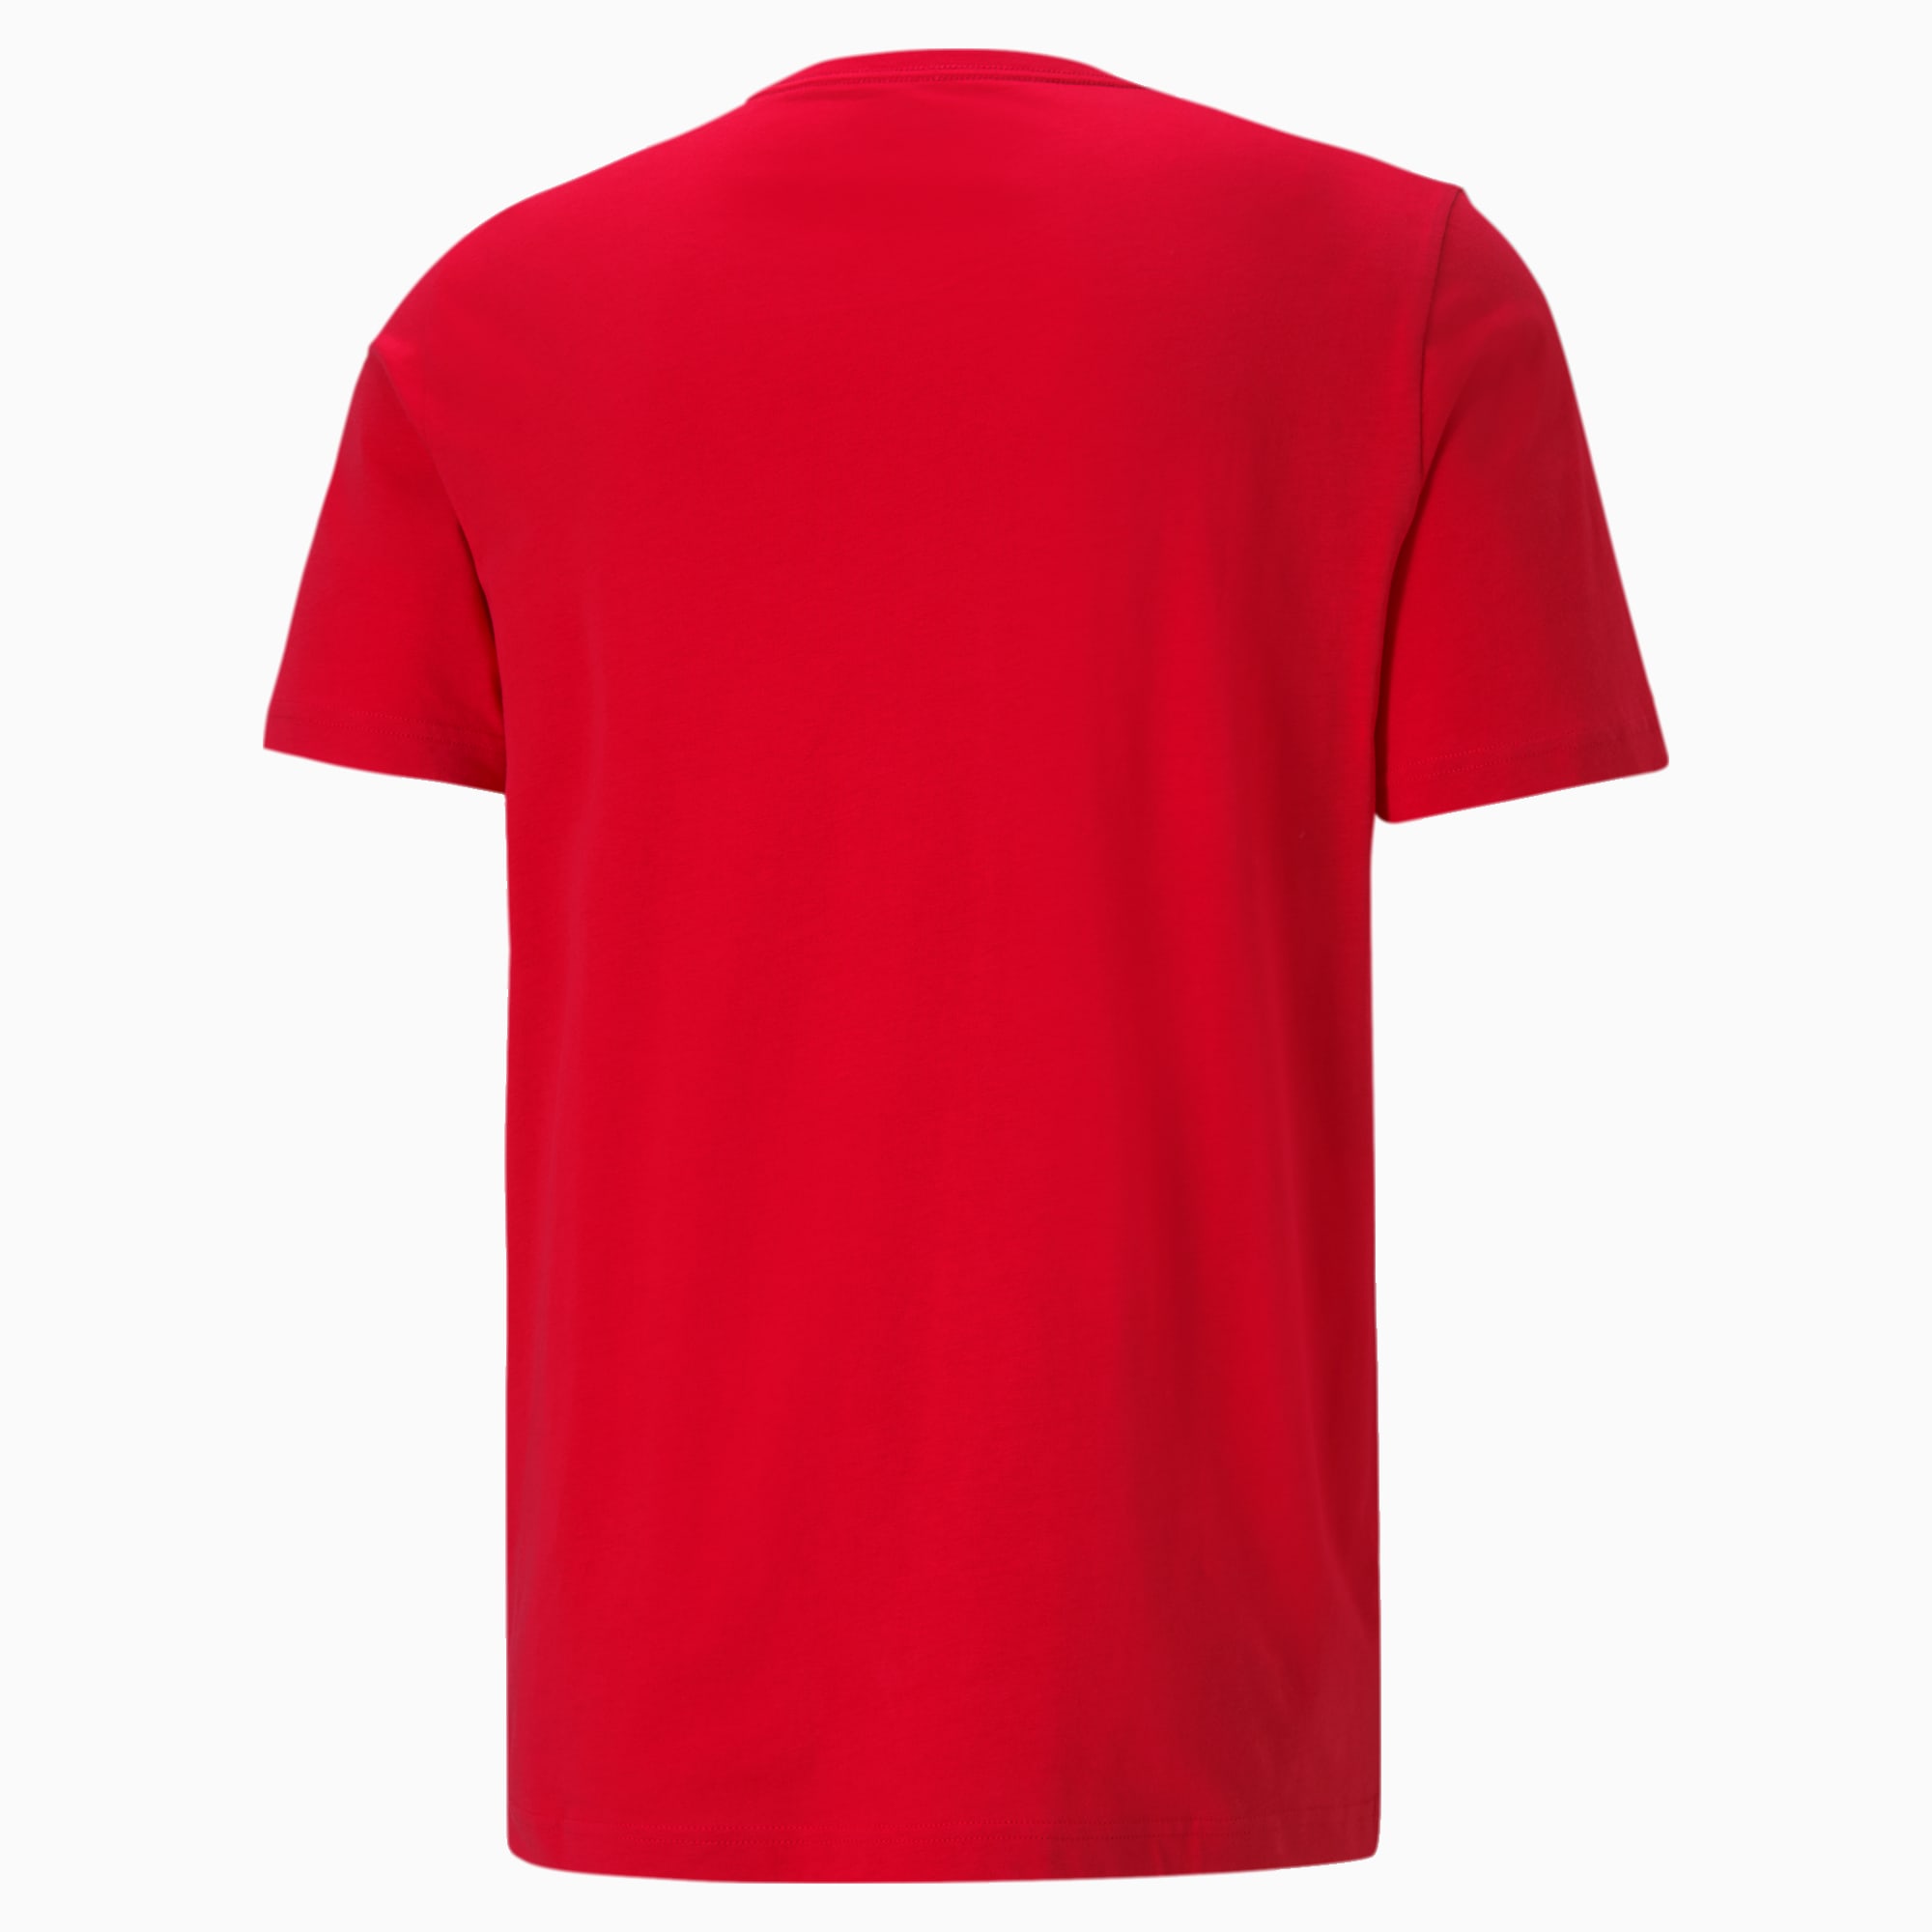 PUMA Essentials Small Logo T-Shirt Men, High Risk Red/High Risk Red, Size XS, Clothing